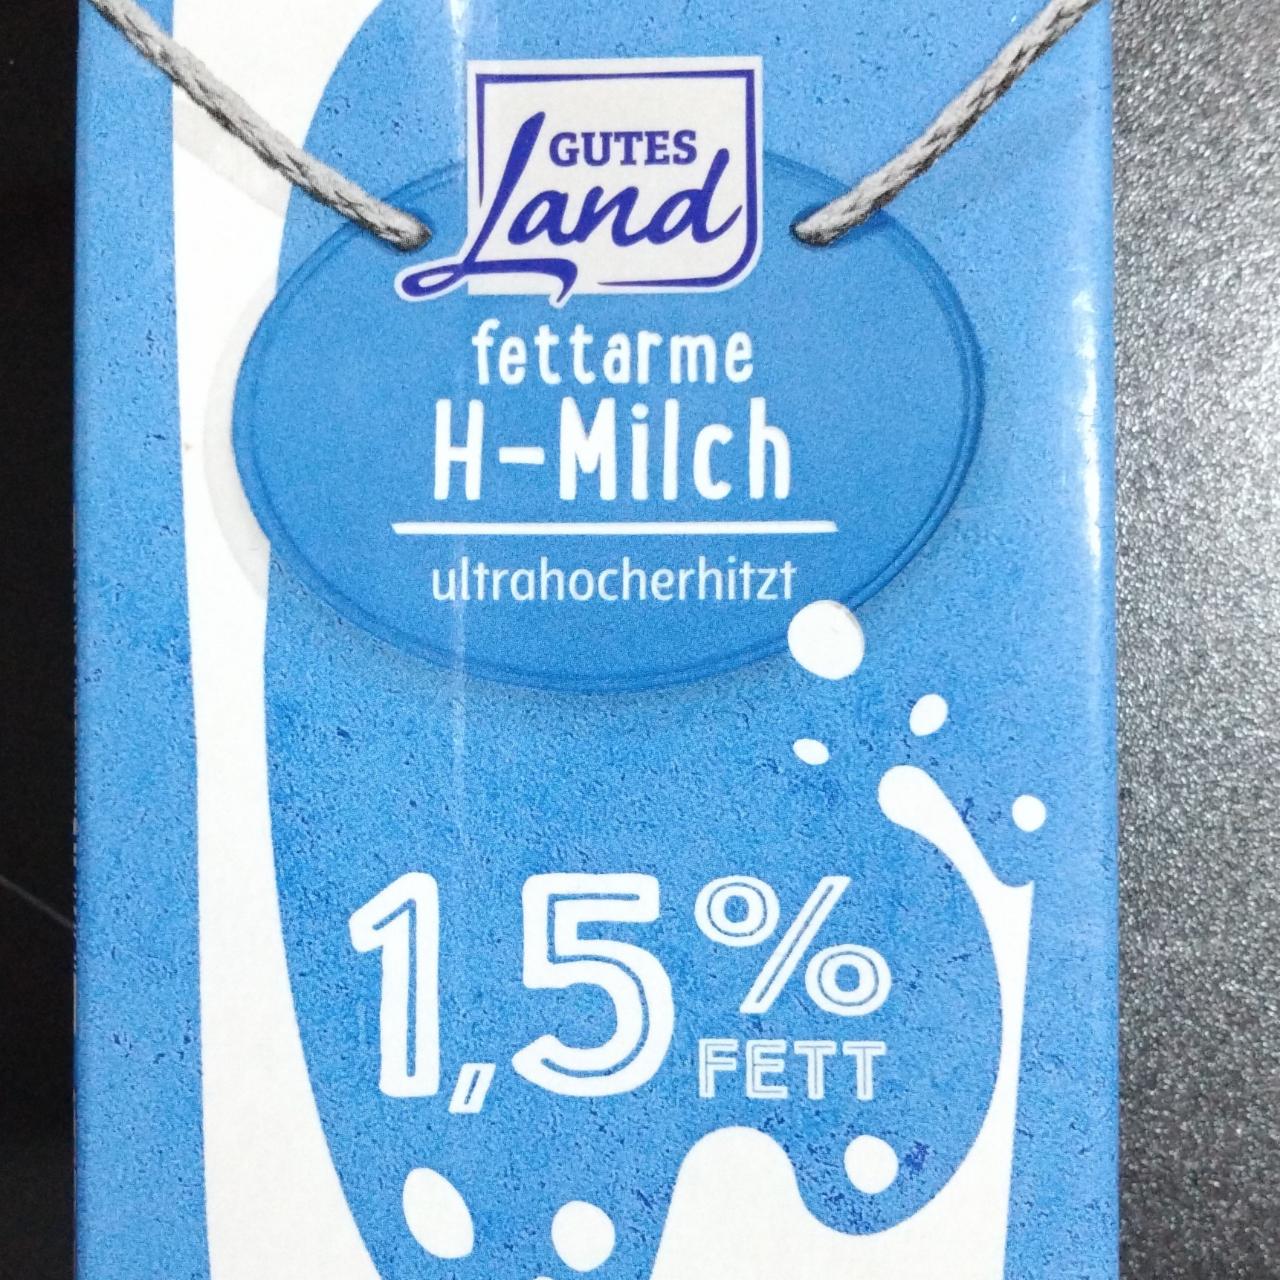 Фото - Fettarme H-Milch 1.5% Gutes Land